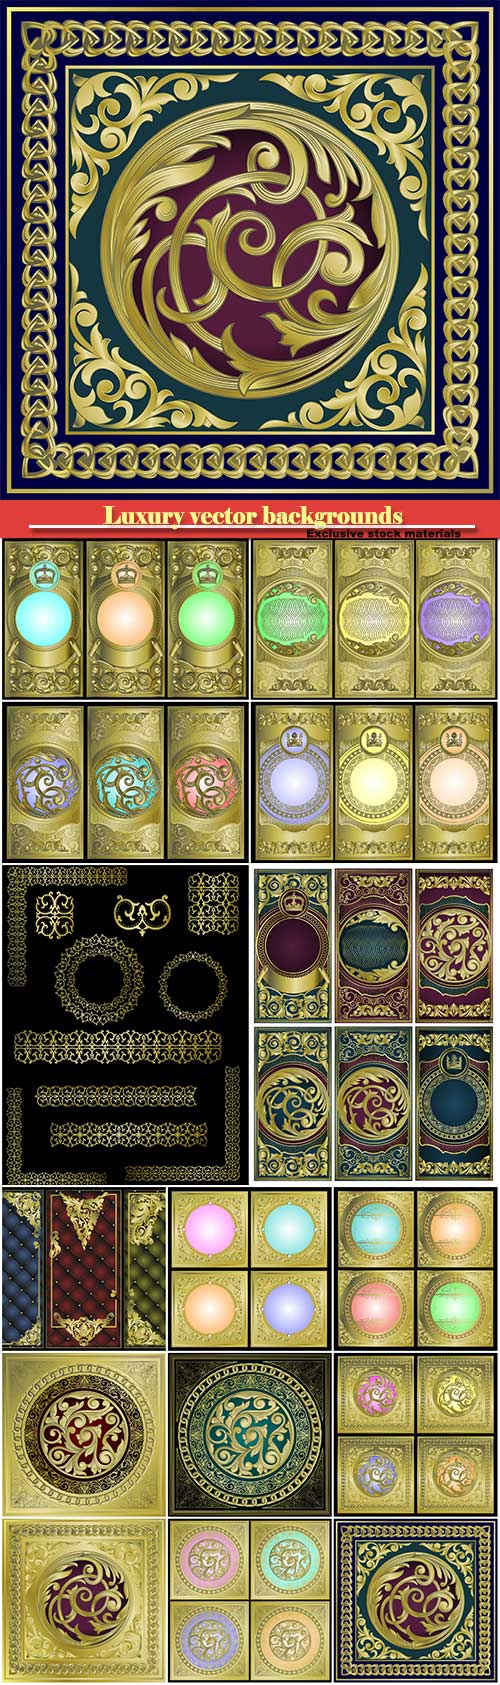 Luxury vector backgrounds and banners with gold decor